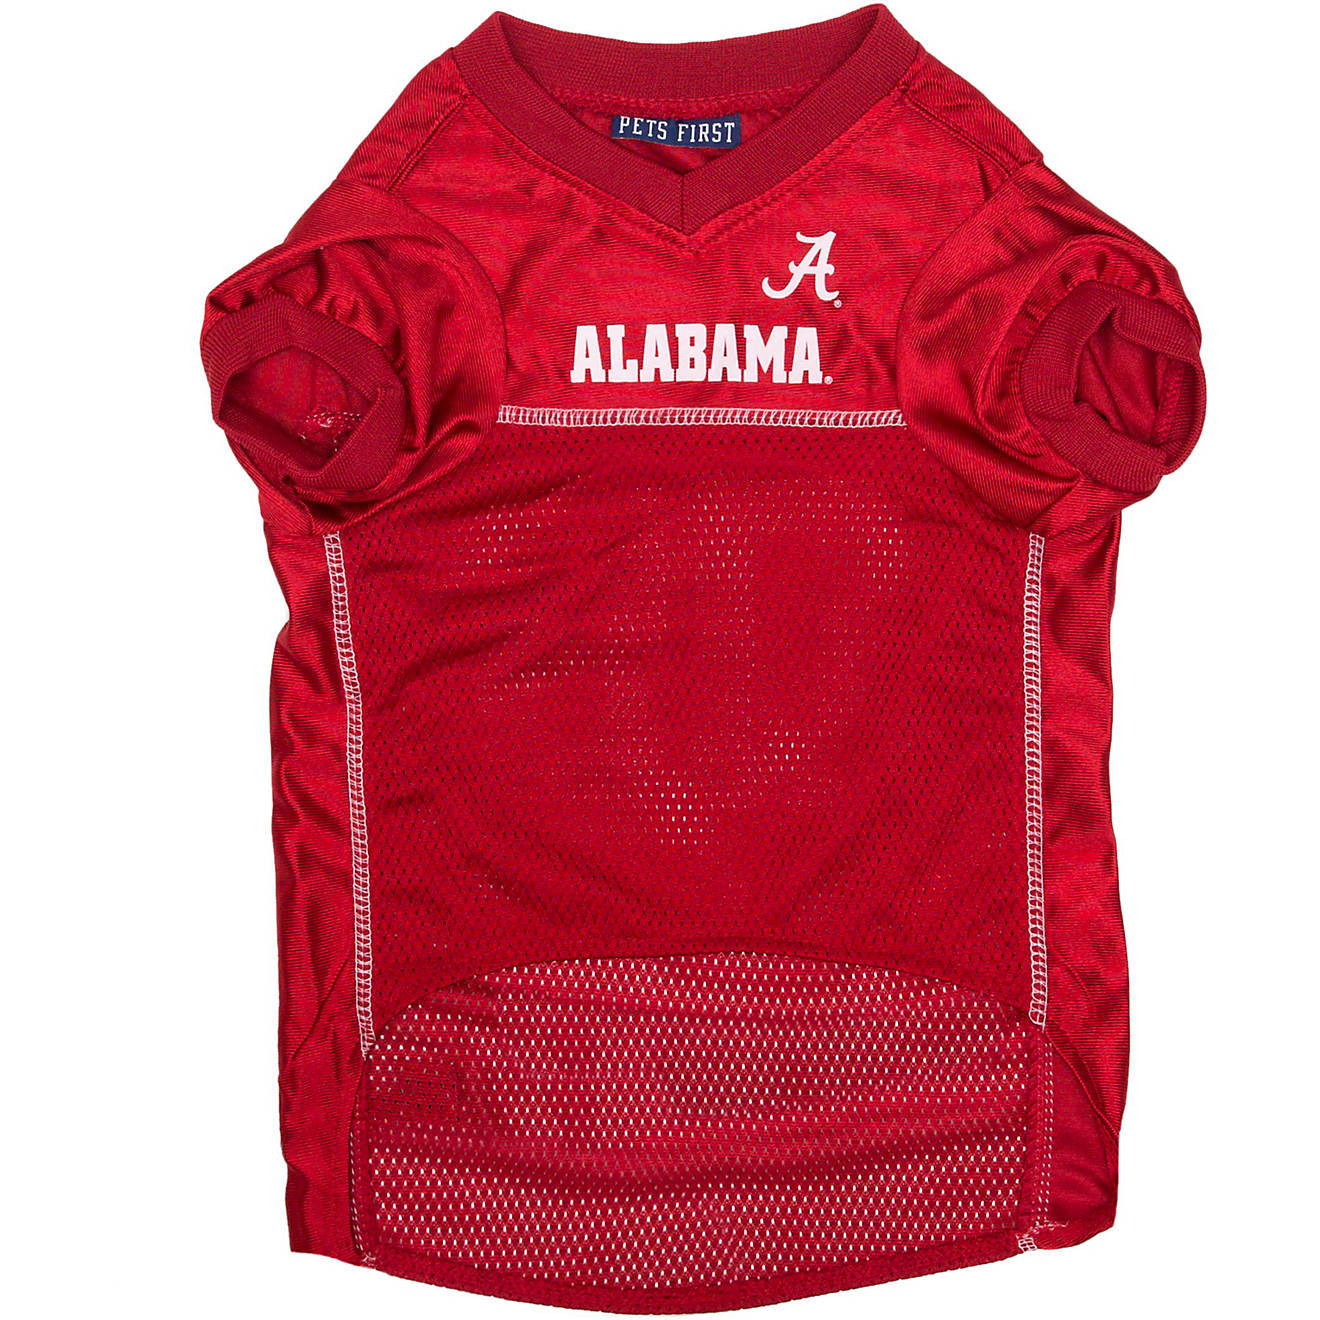 Pets First University of Alabama Mesh Dog Jersey                                                                                 - view number 1